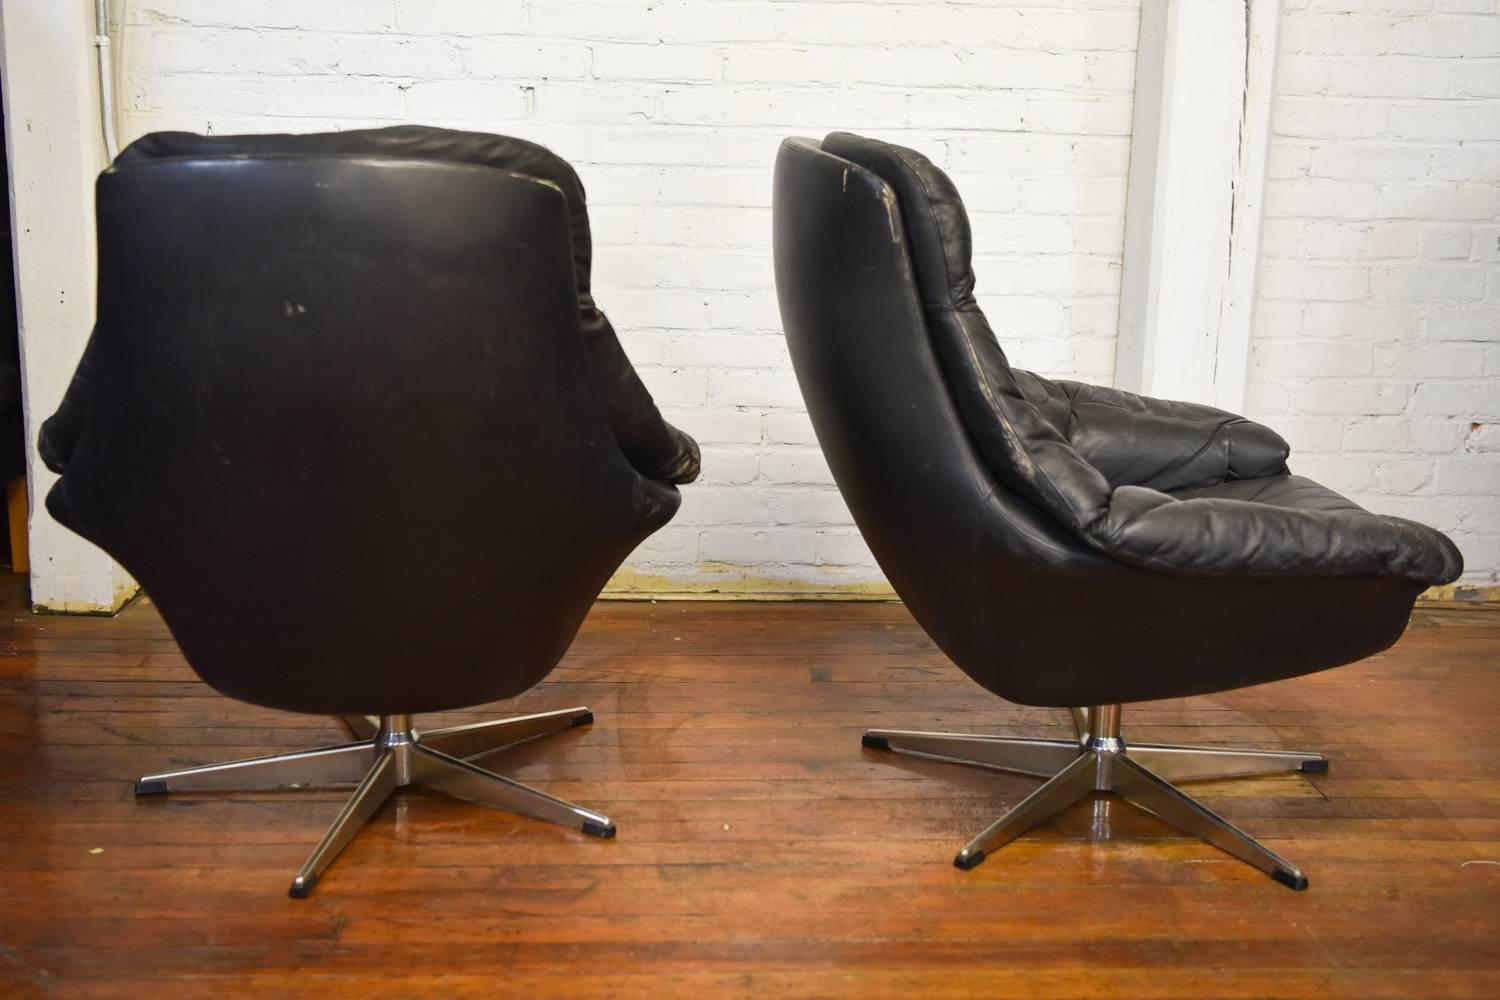 Stainless Steel Pair of Black Leather Lounge Chairs with Ottoman by H.W. Klein for Bramin Mobler